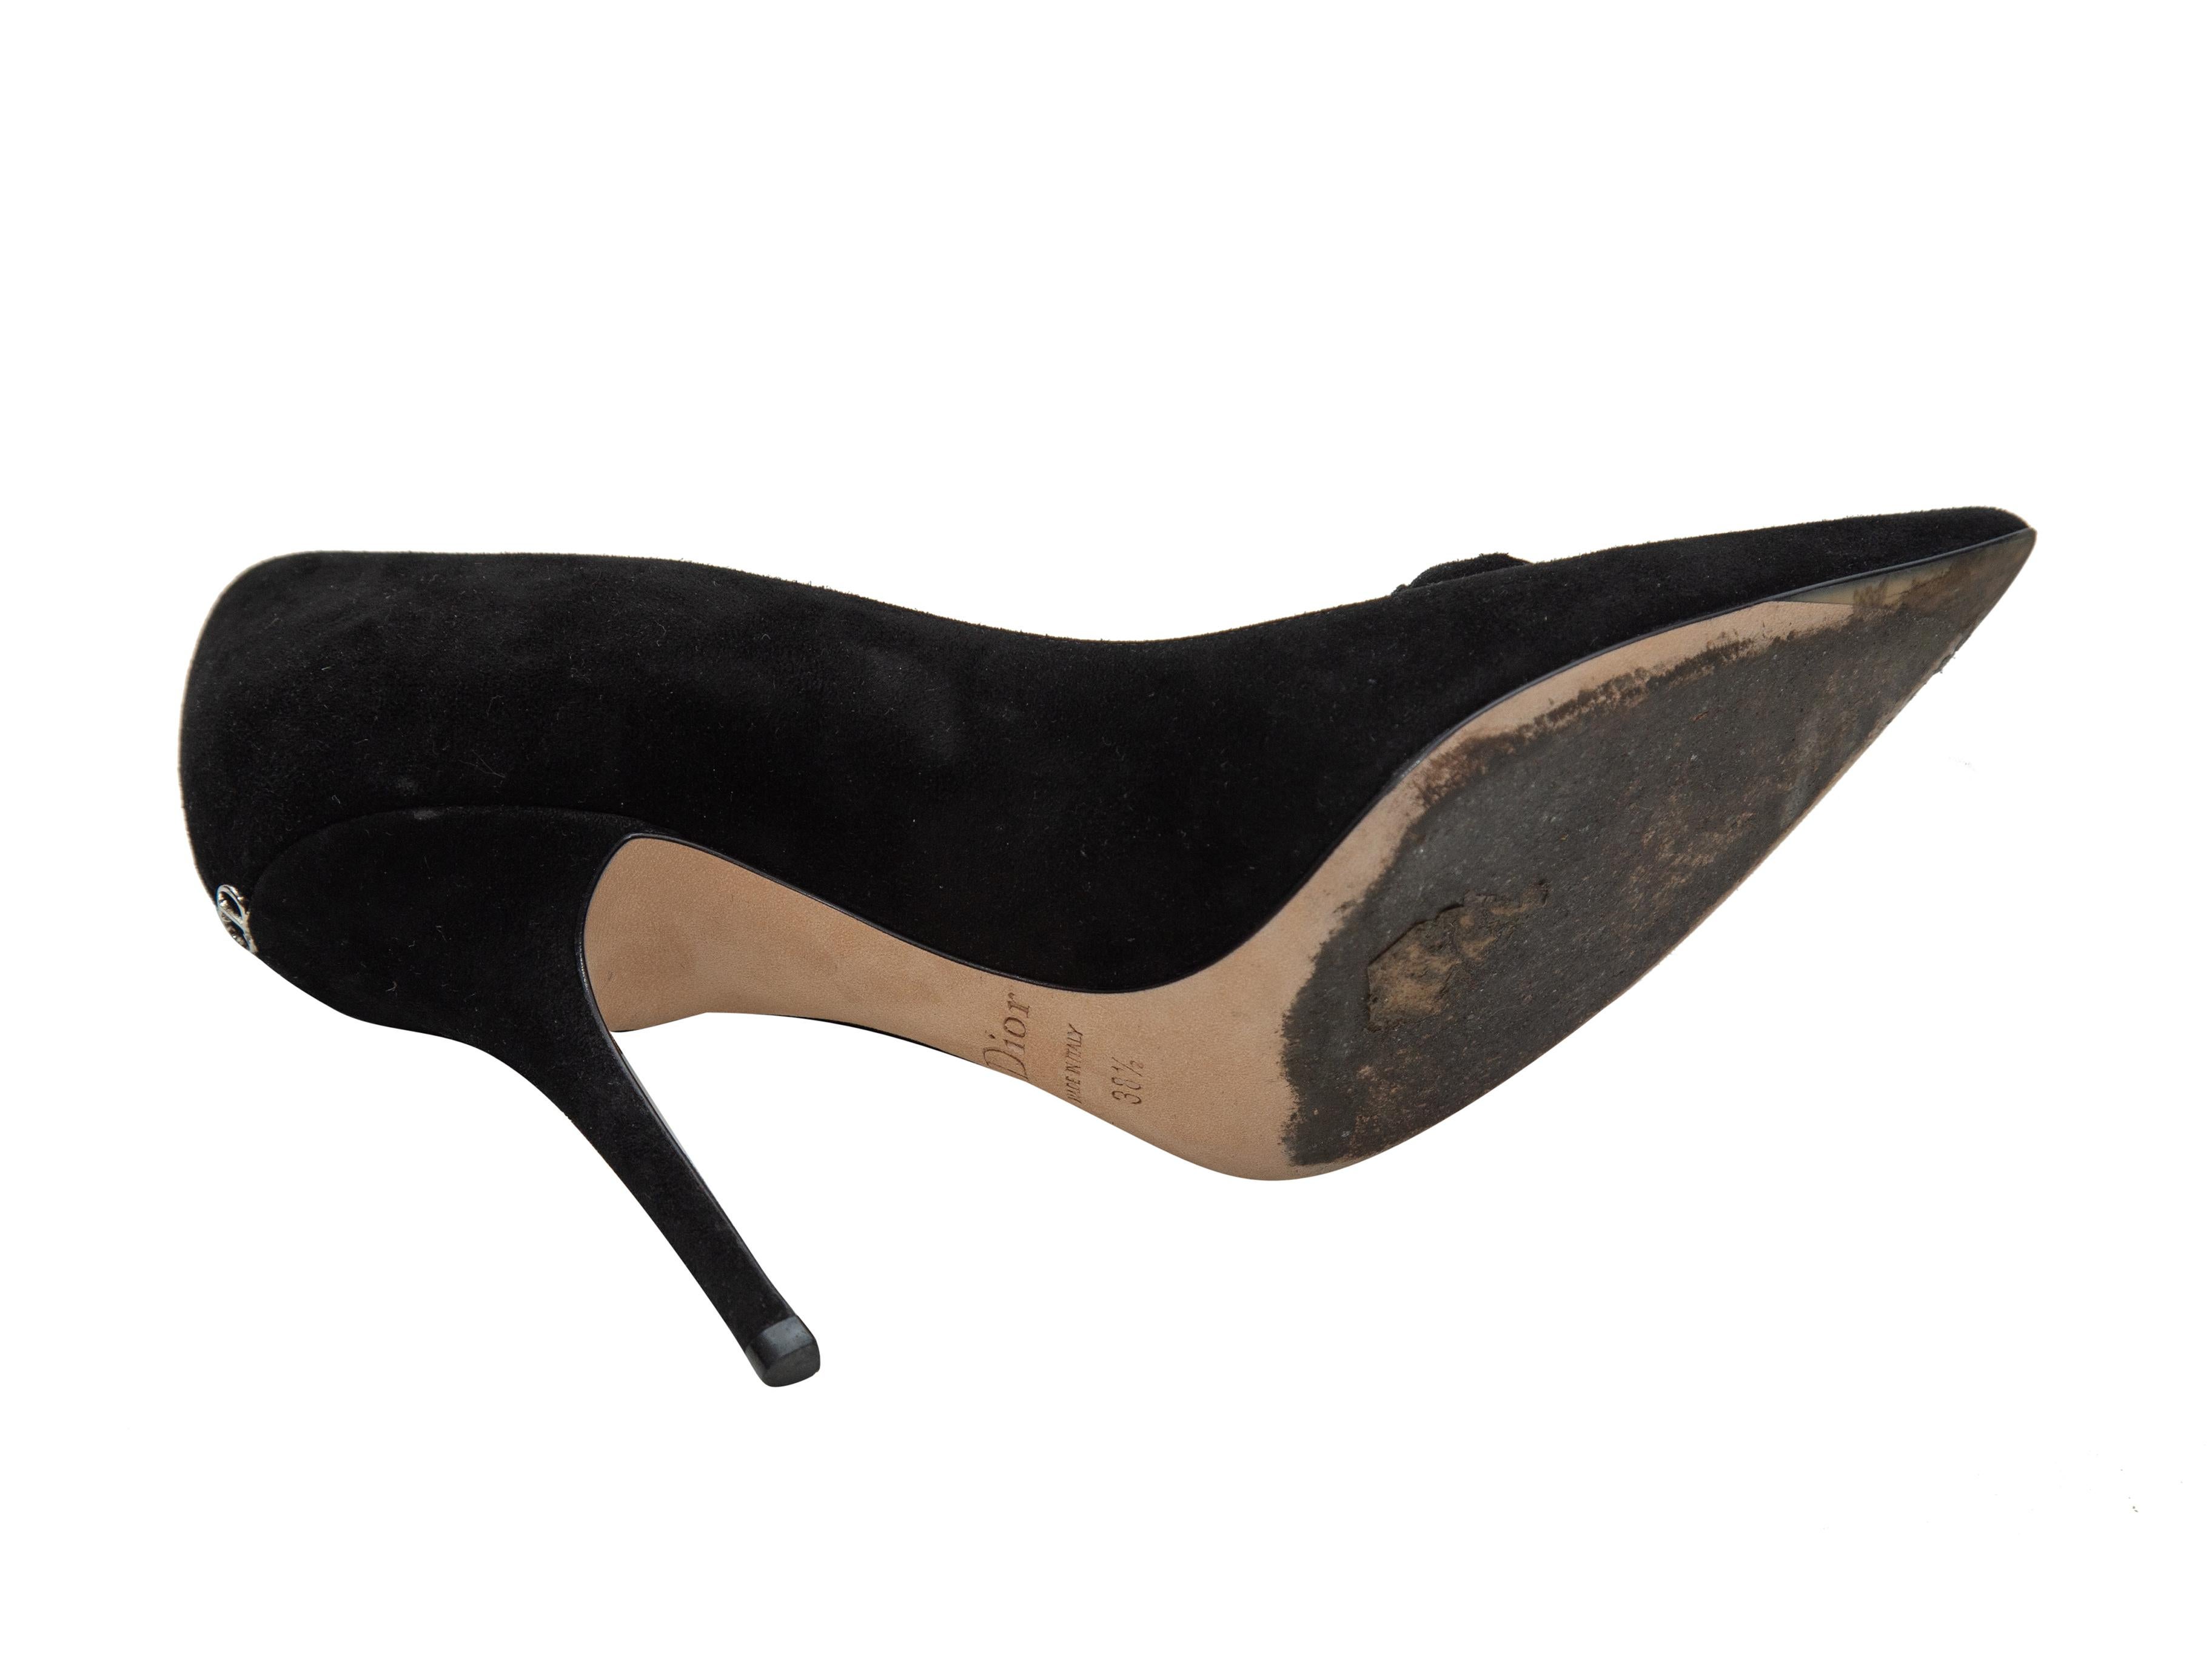 Christian Dior Black Suede Pointed-Toe Pumps 1